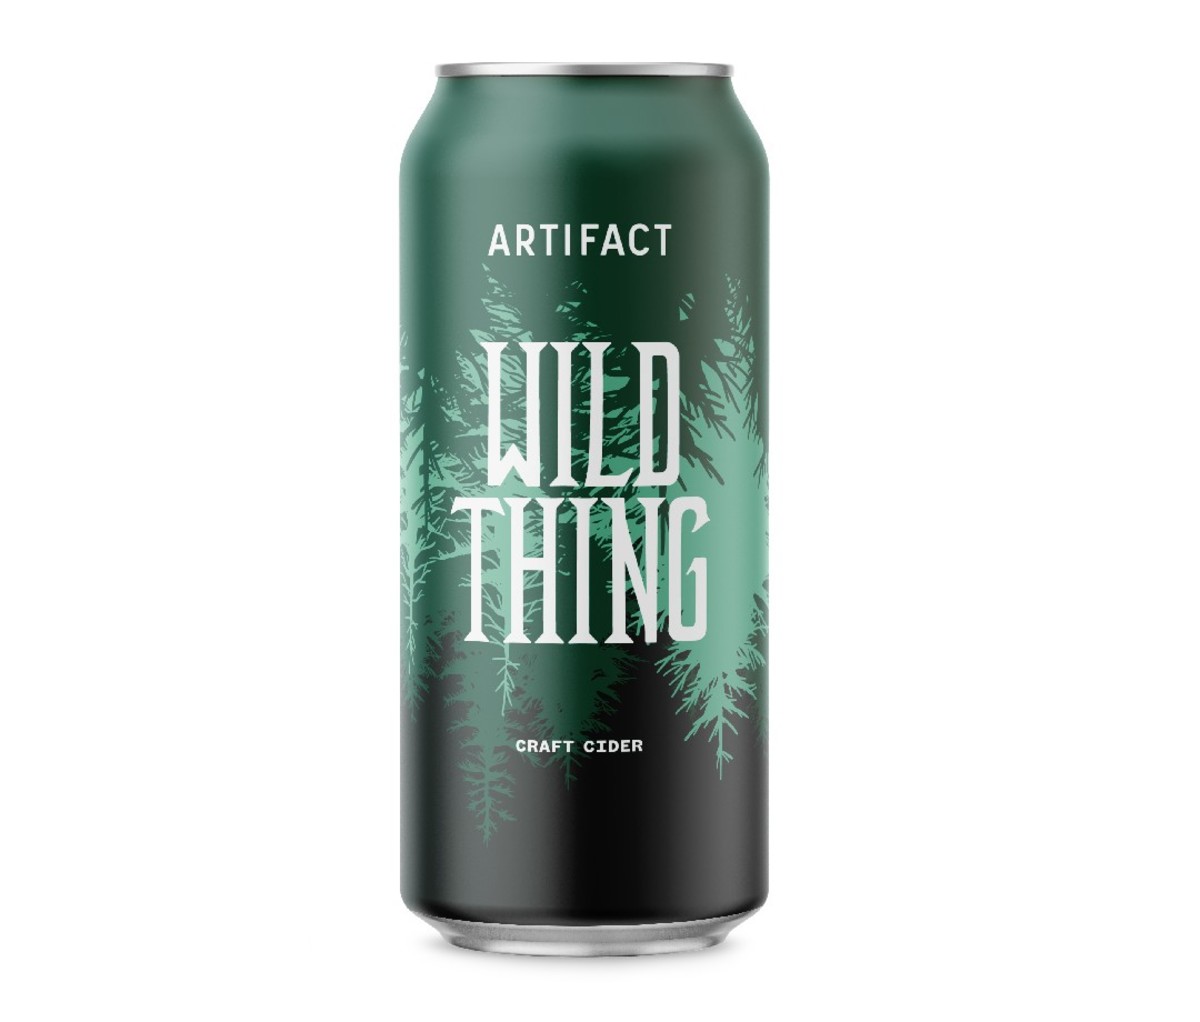 One tall can of Artifact Cider Project Wild Thing